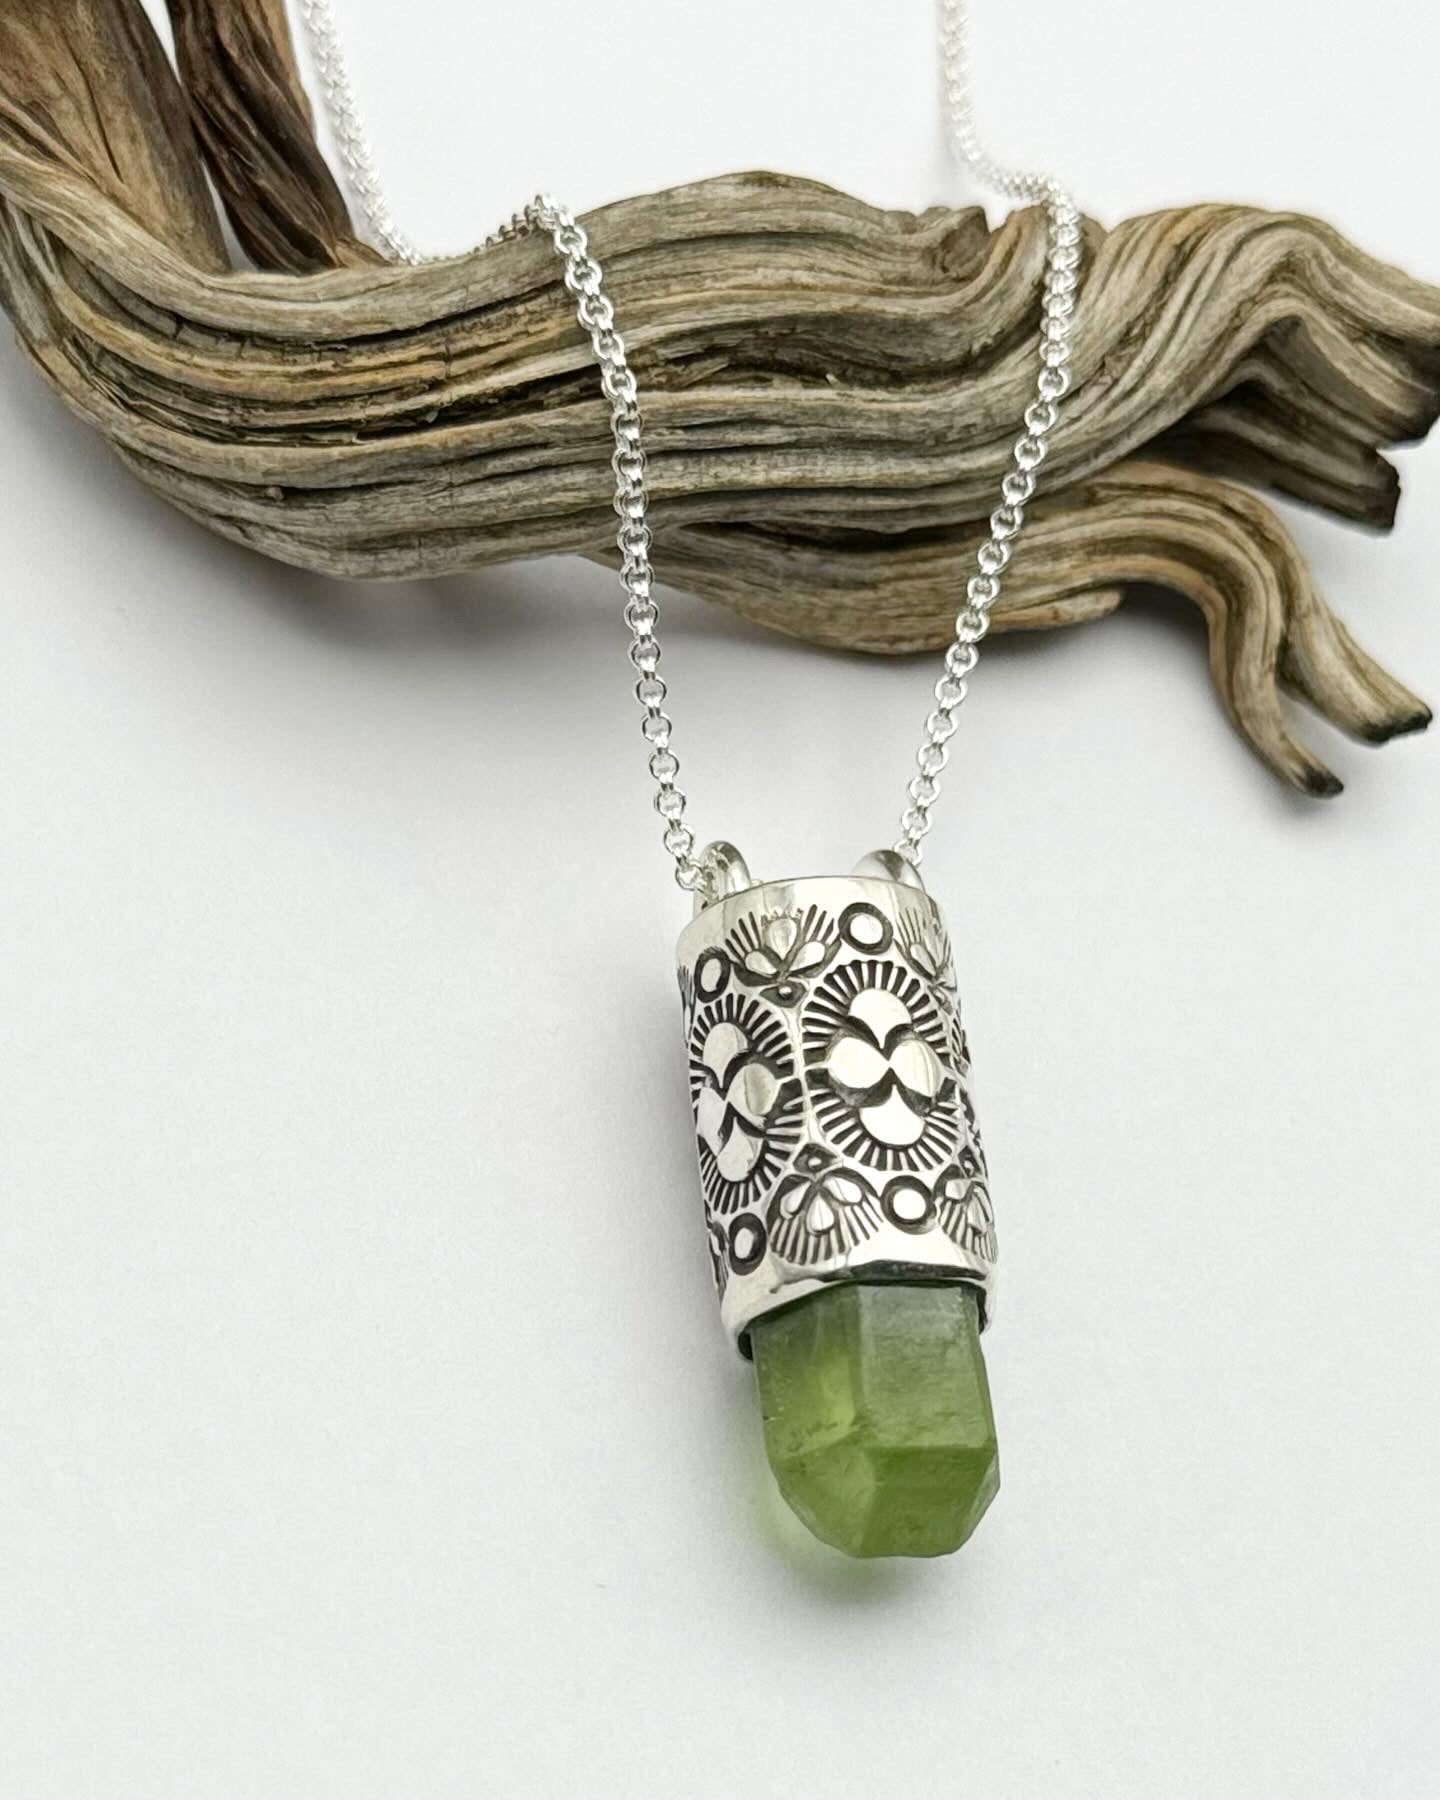 Peridot Oasis/Prickly Pear Talisman Necklace